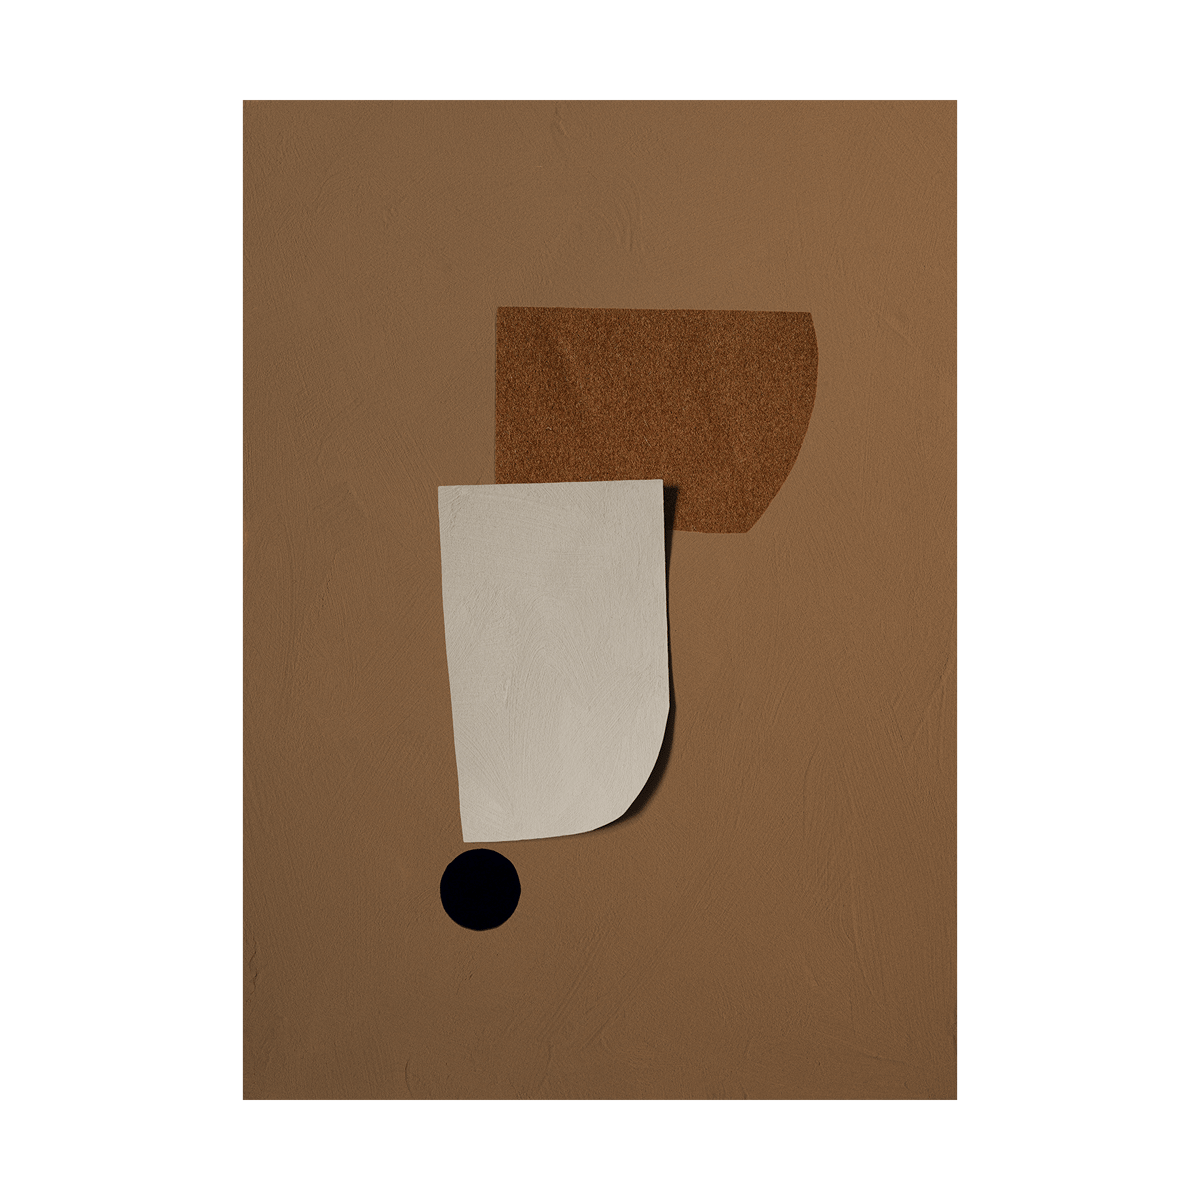 Paper Collective Tipping Point 02 plakat 30×40 cm